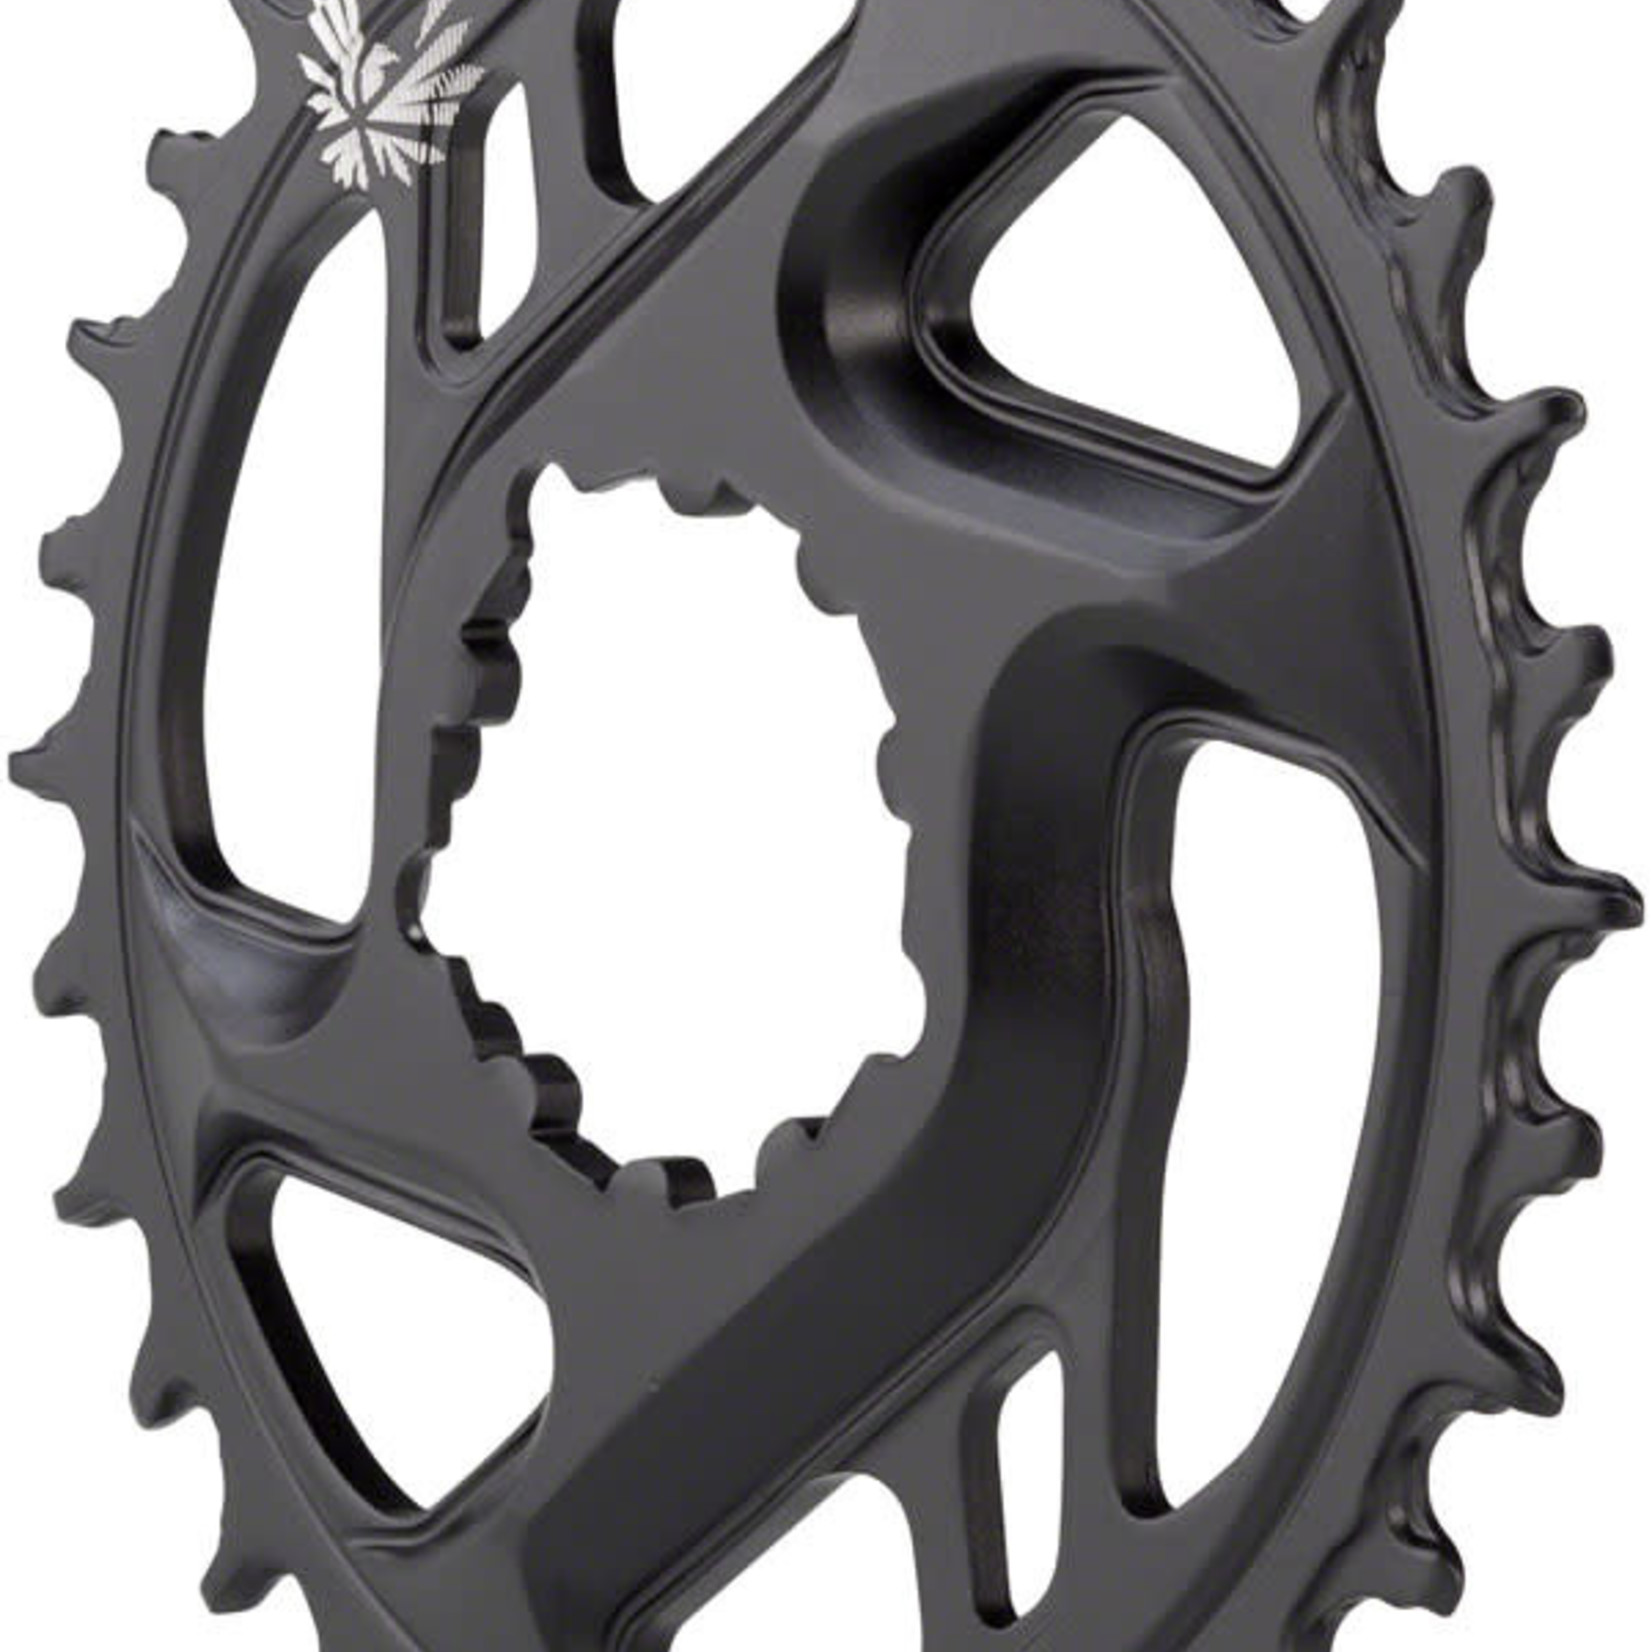 SRAM SRAM X-Sync 2 Eagle Cold Forged Direct Mount Chainring 32T 6mm Offset